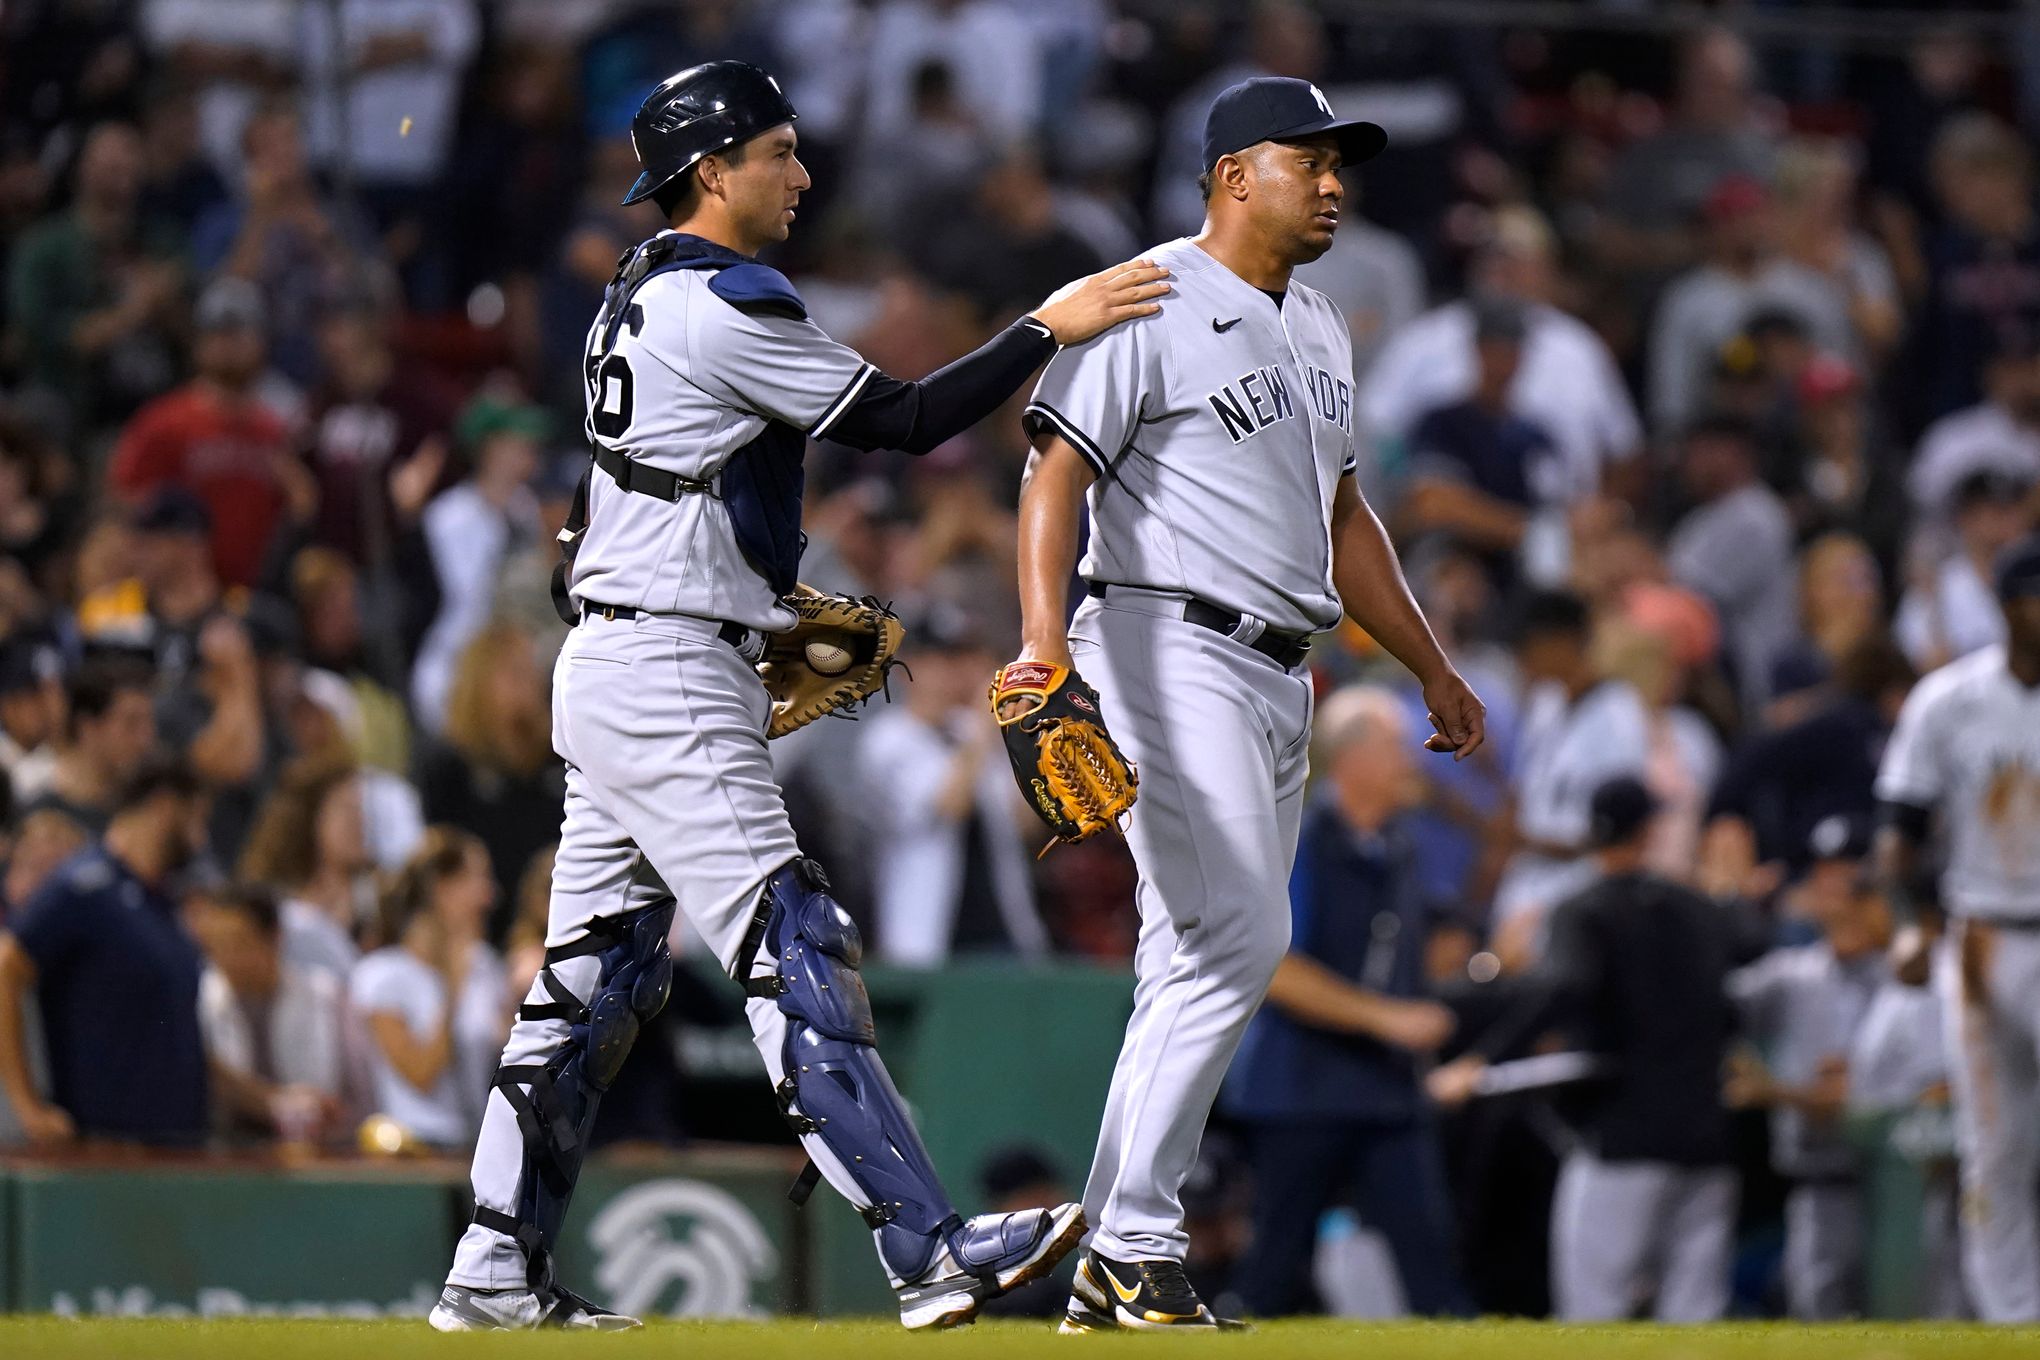 Another blow for Yankees bullpen going into postseason